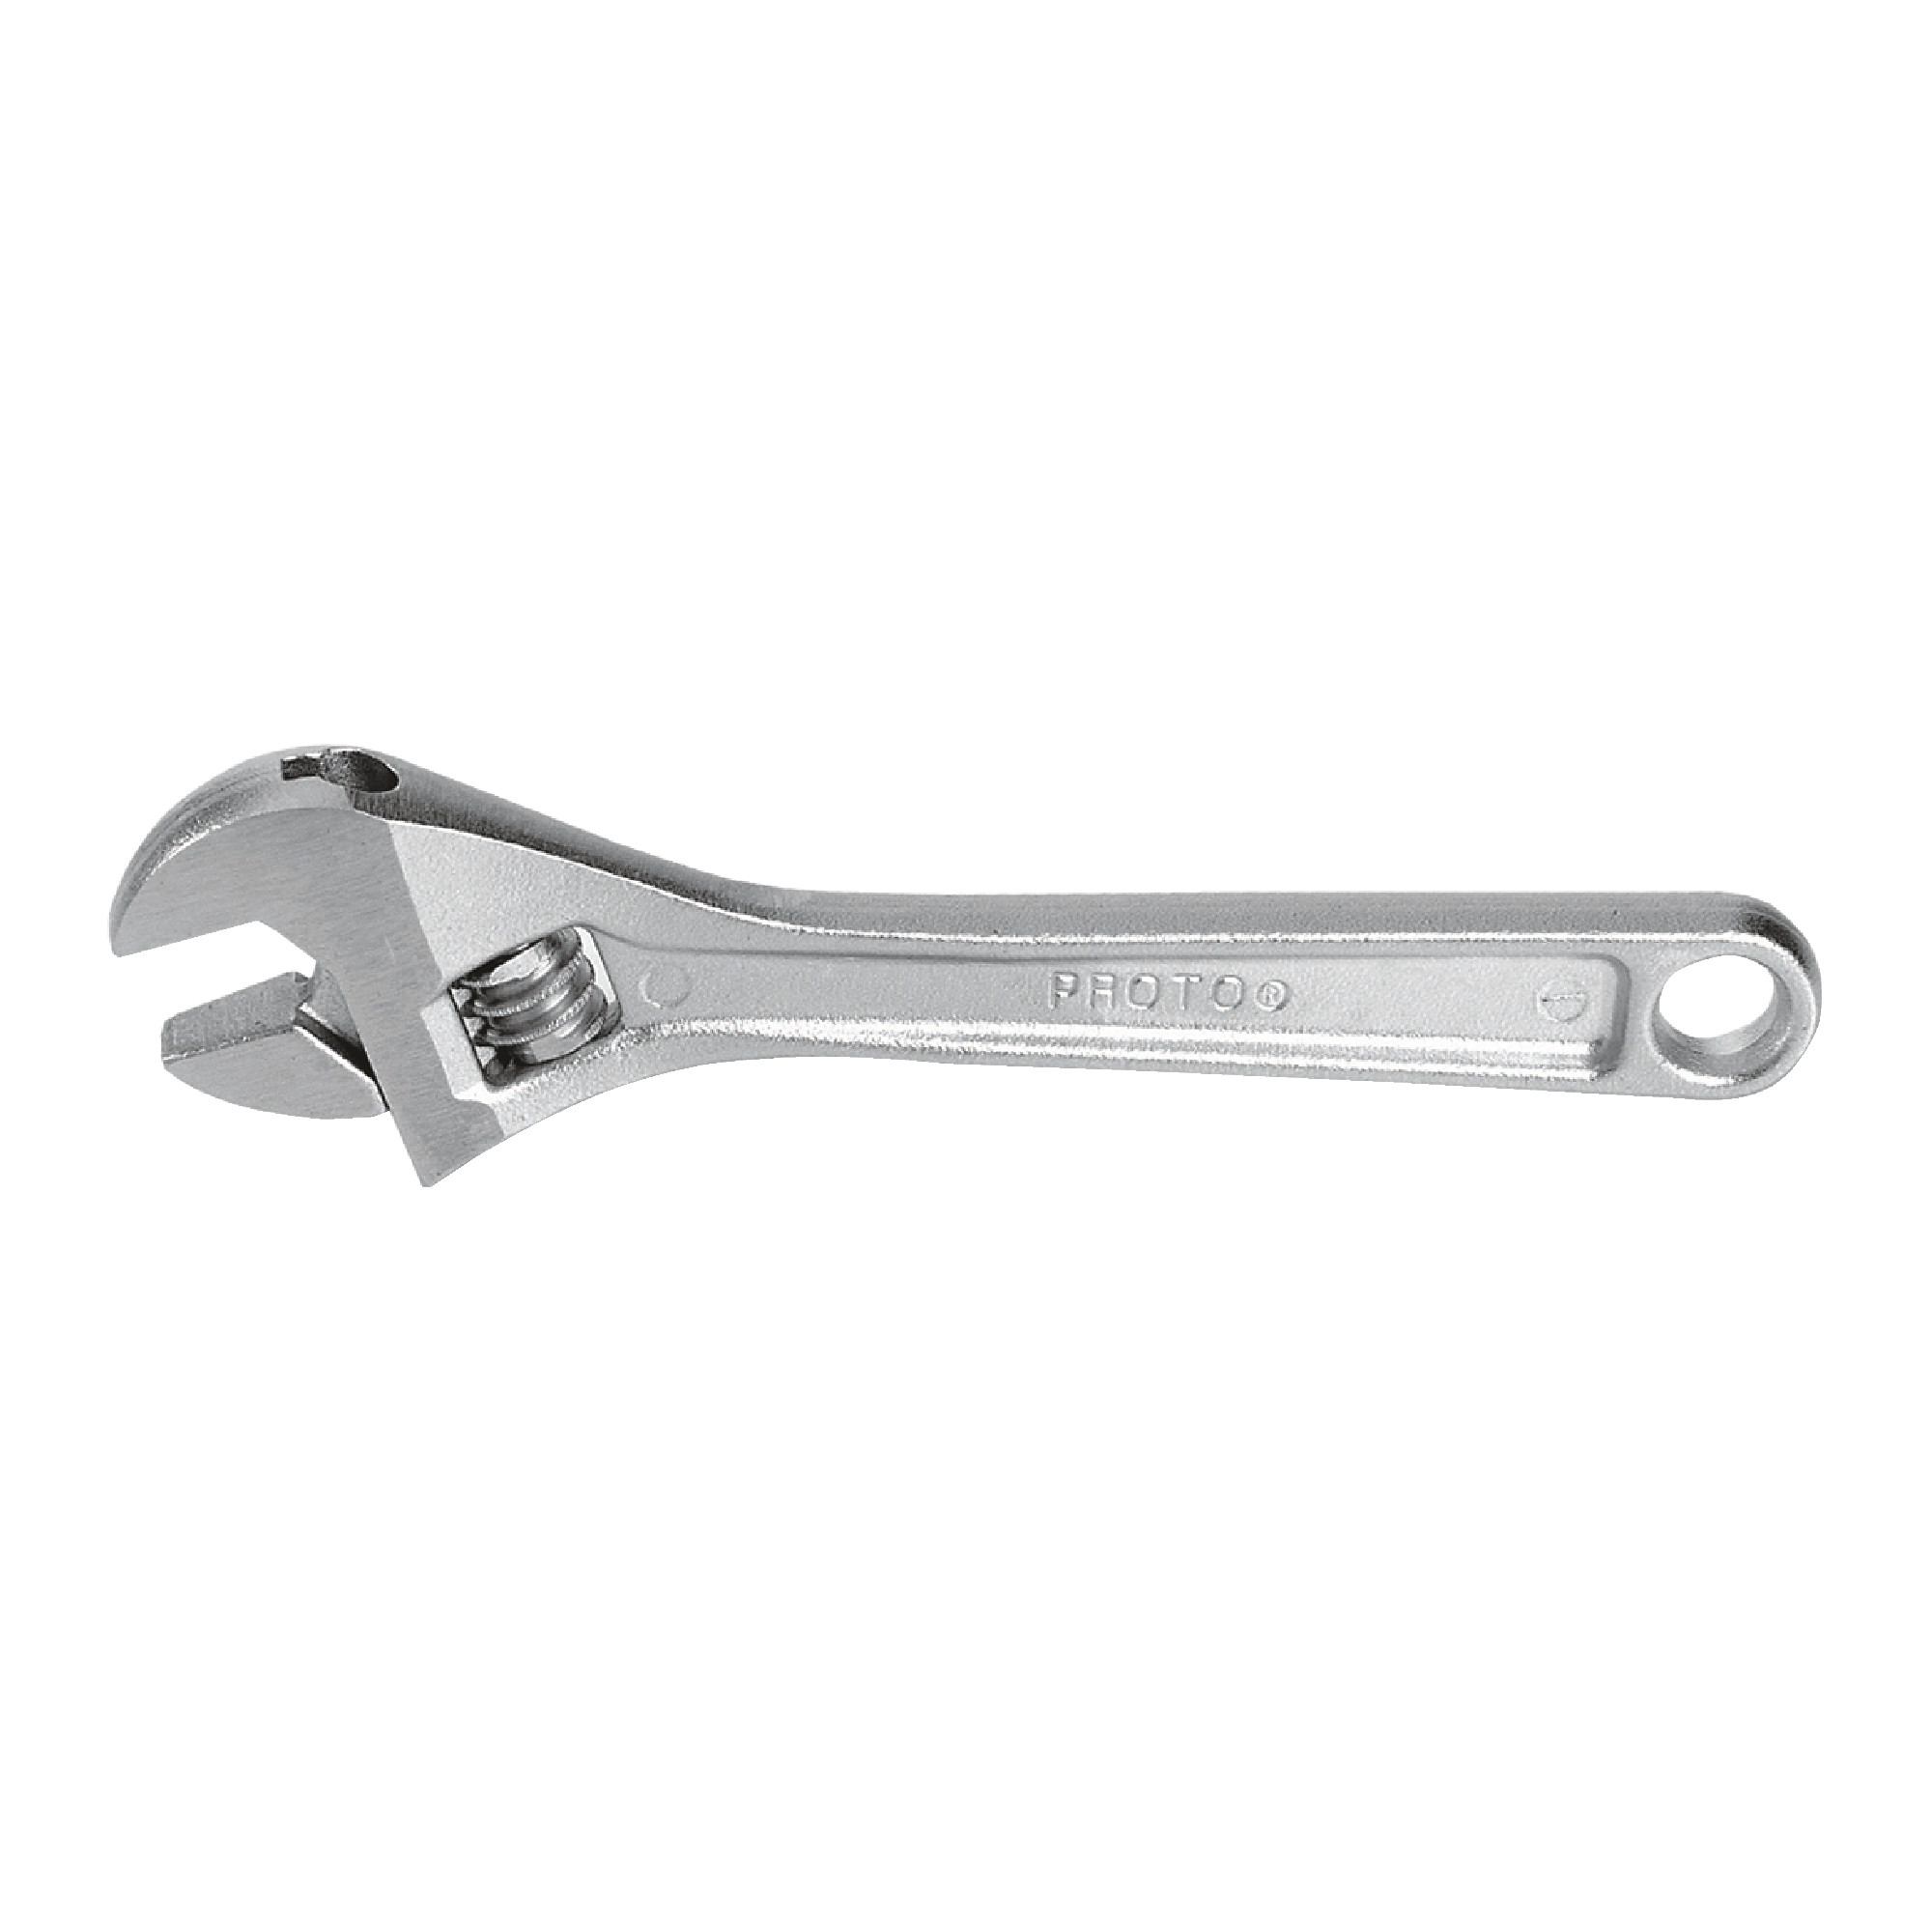 J708 1-1/8" Adjustable Wrench With Satin Chrome Finish